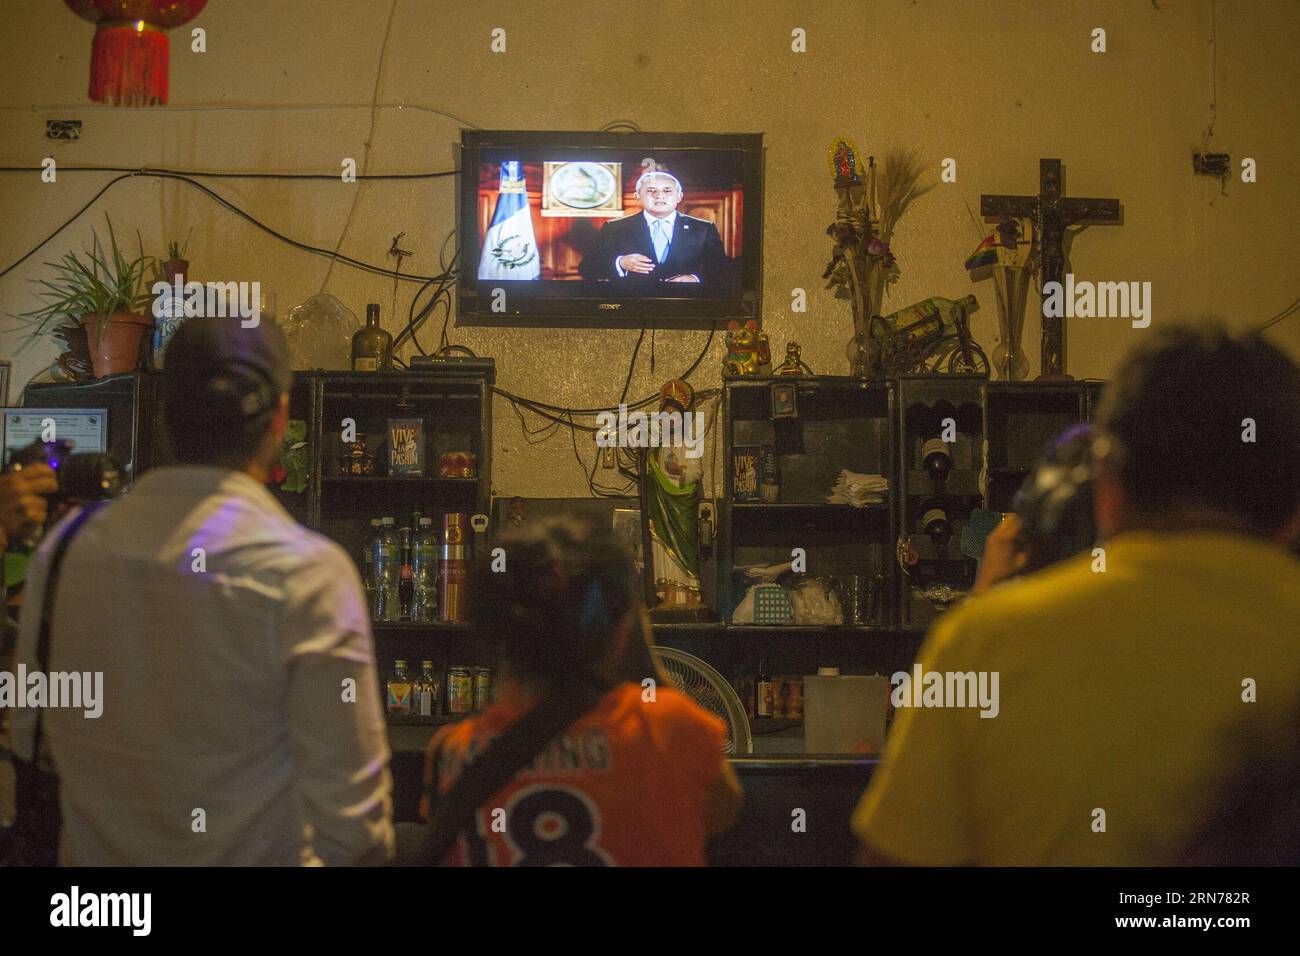 (150824) -- GUATEMALA CITY, Aug. 23, 2015 -- People watch TV as Guatemala s President Otto Perez Molina delivering a speech, in Guatemala City, capital of Guatemala, on Aug. 23, 2015. President Otto Perez Molina says he won t resign from office despite investigators saying he may have been involved in a customs fraud scandal that has thrown the country into political crisis. Luis Echeverria) GUATEMALA-GUATEMALA CITY-OTTO PEREZ MOLINA e LuisxEcheverria PUBLICATIONxNOTxINxCHN   150824 Guatemala City Aug 23 2015 Celebrities Watch TV As Guatemala S President Otto Perez Molina Delivering a Speech i Stock Photo